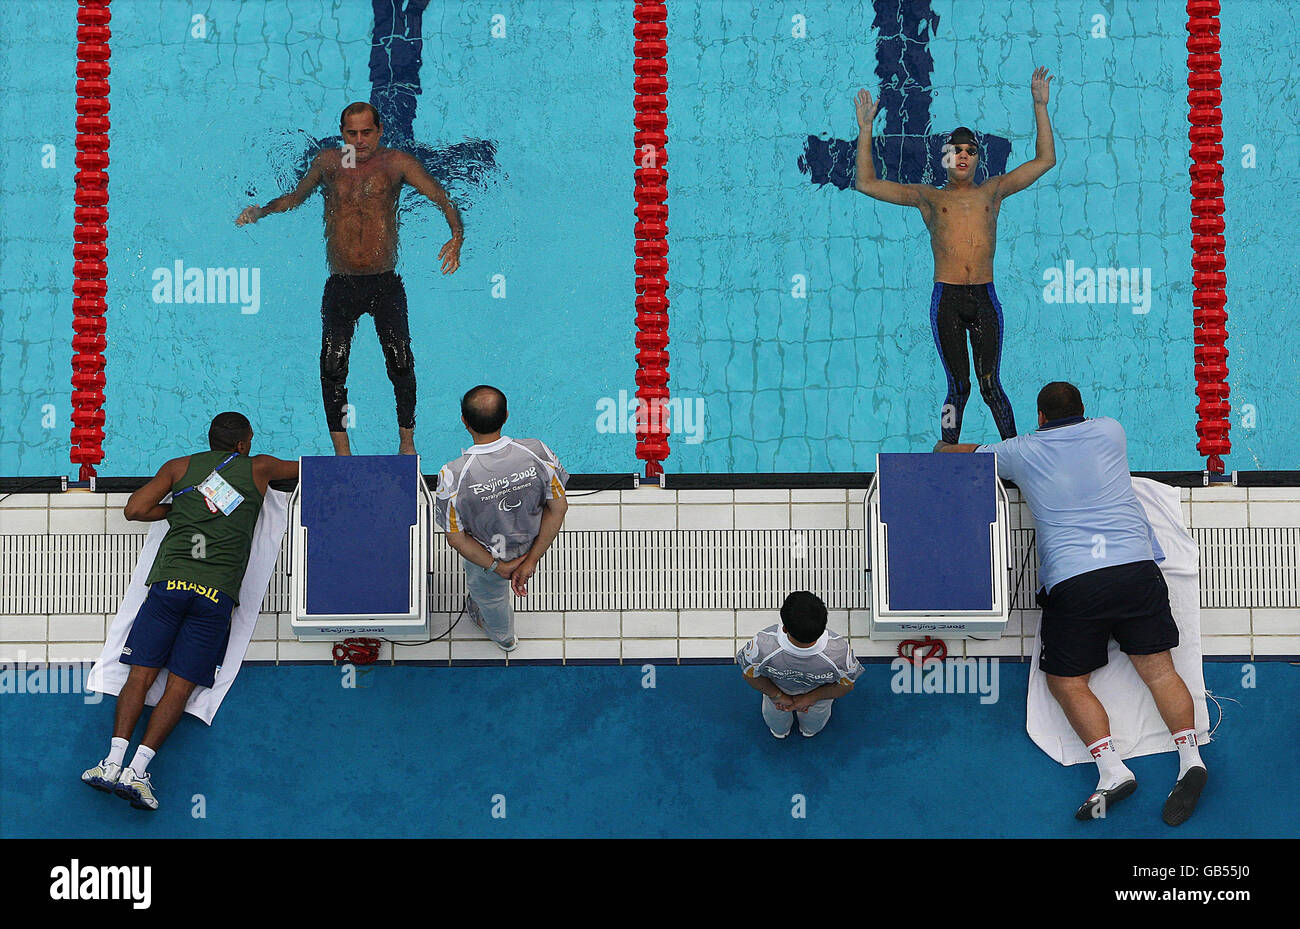 Competitors take part in the Men's 50M Backstroke S2 Heats in the National Acquatic Centre, Beijing. Stock Photo